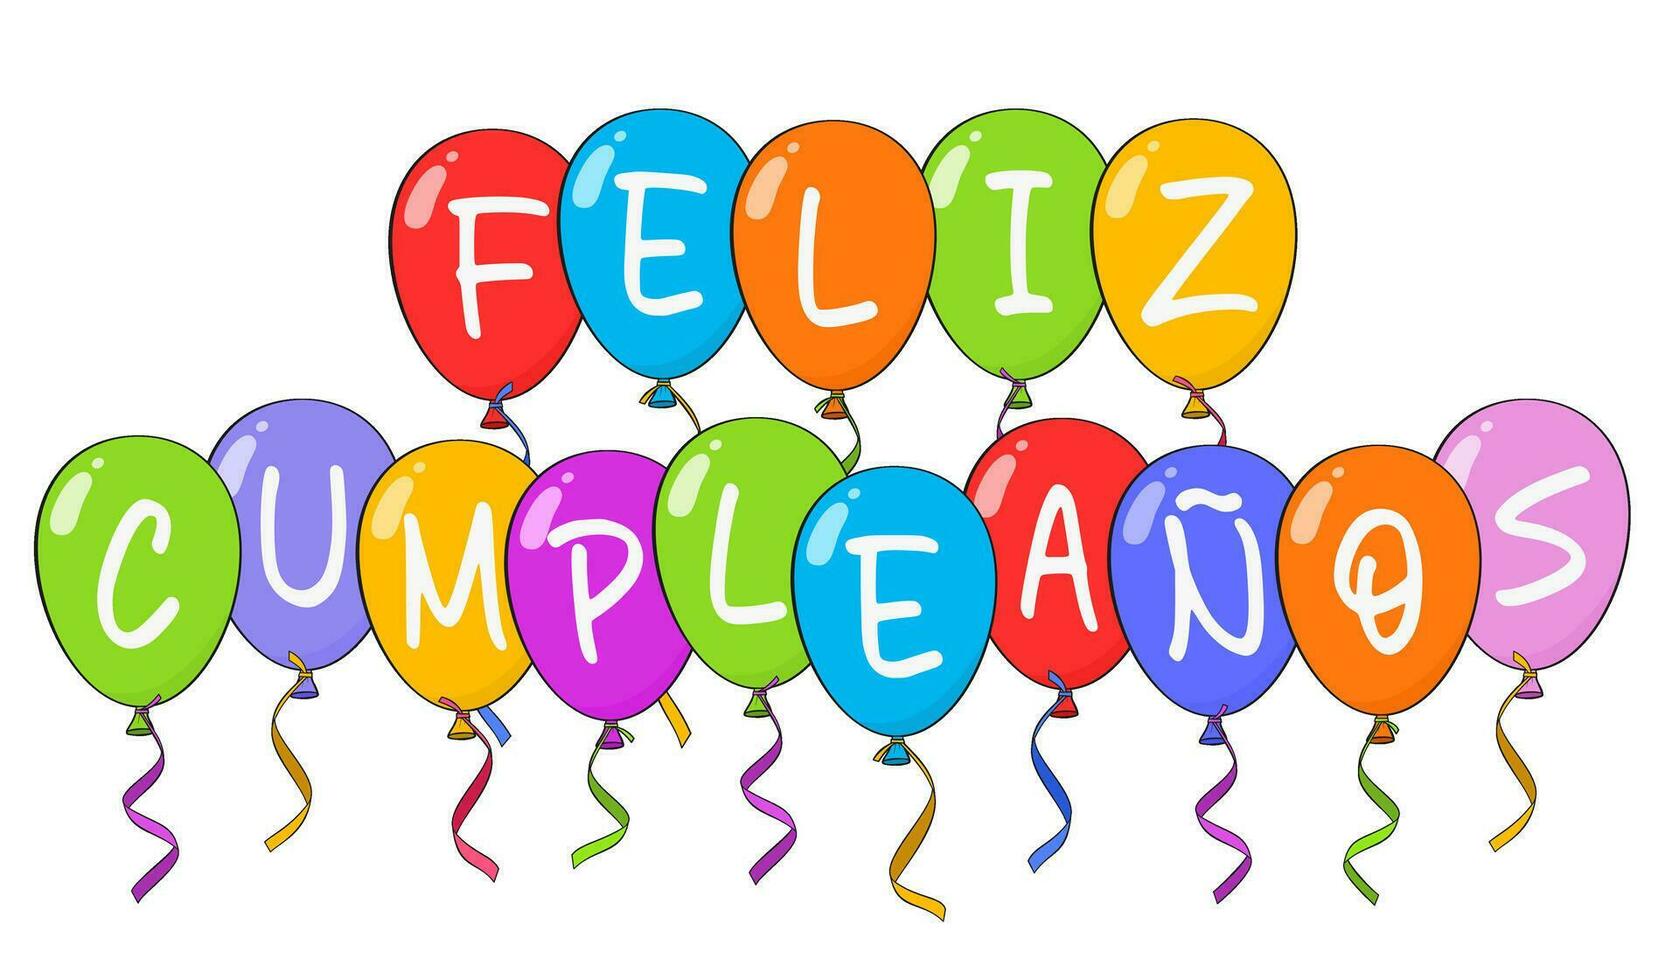 Happy Birthday lettering in Spanish with colorful balloons vector